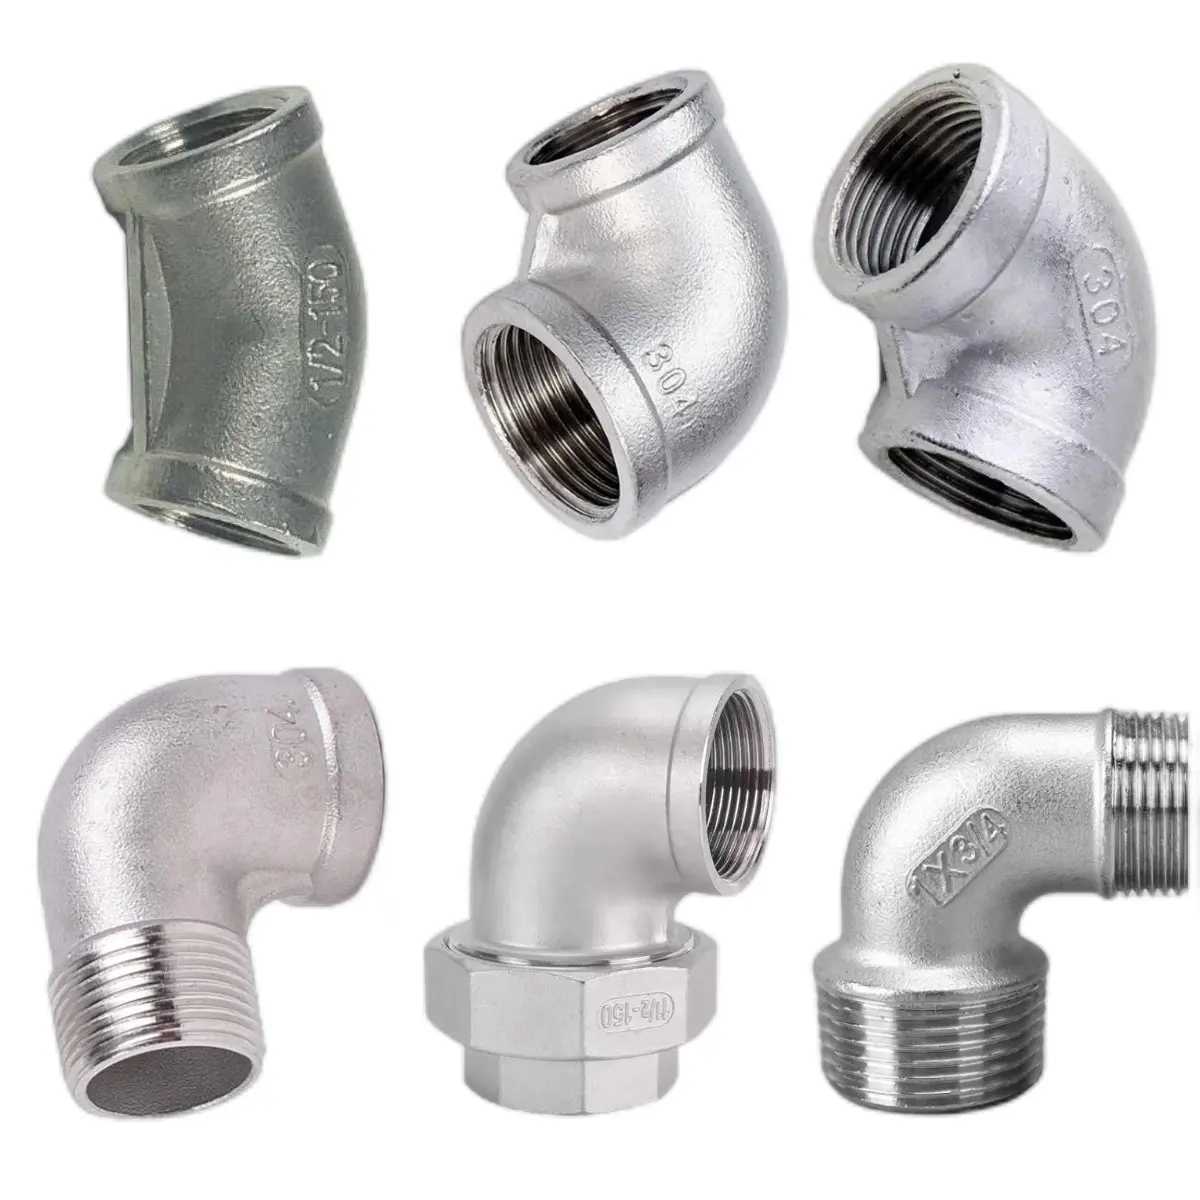 FREE SAMPLE stainless steel 201 304 multi-type male female reducing elbow tee cross union cap coupling thread pipe fittings